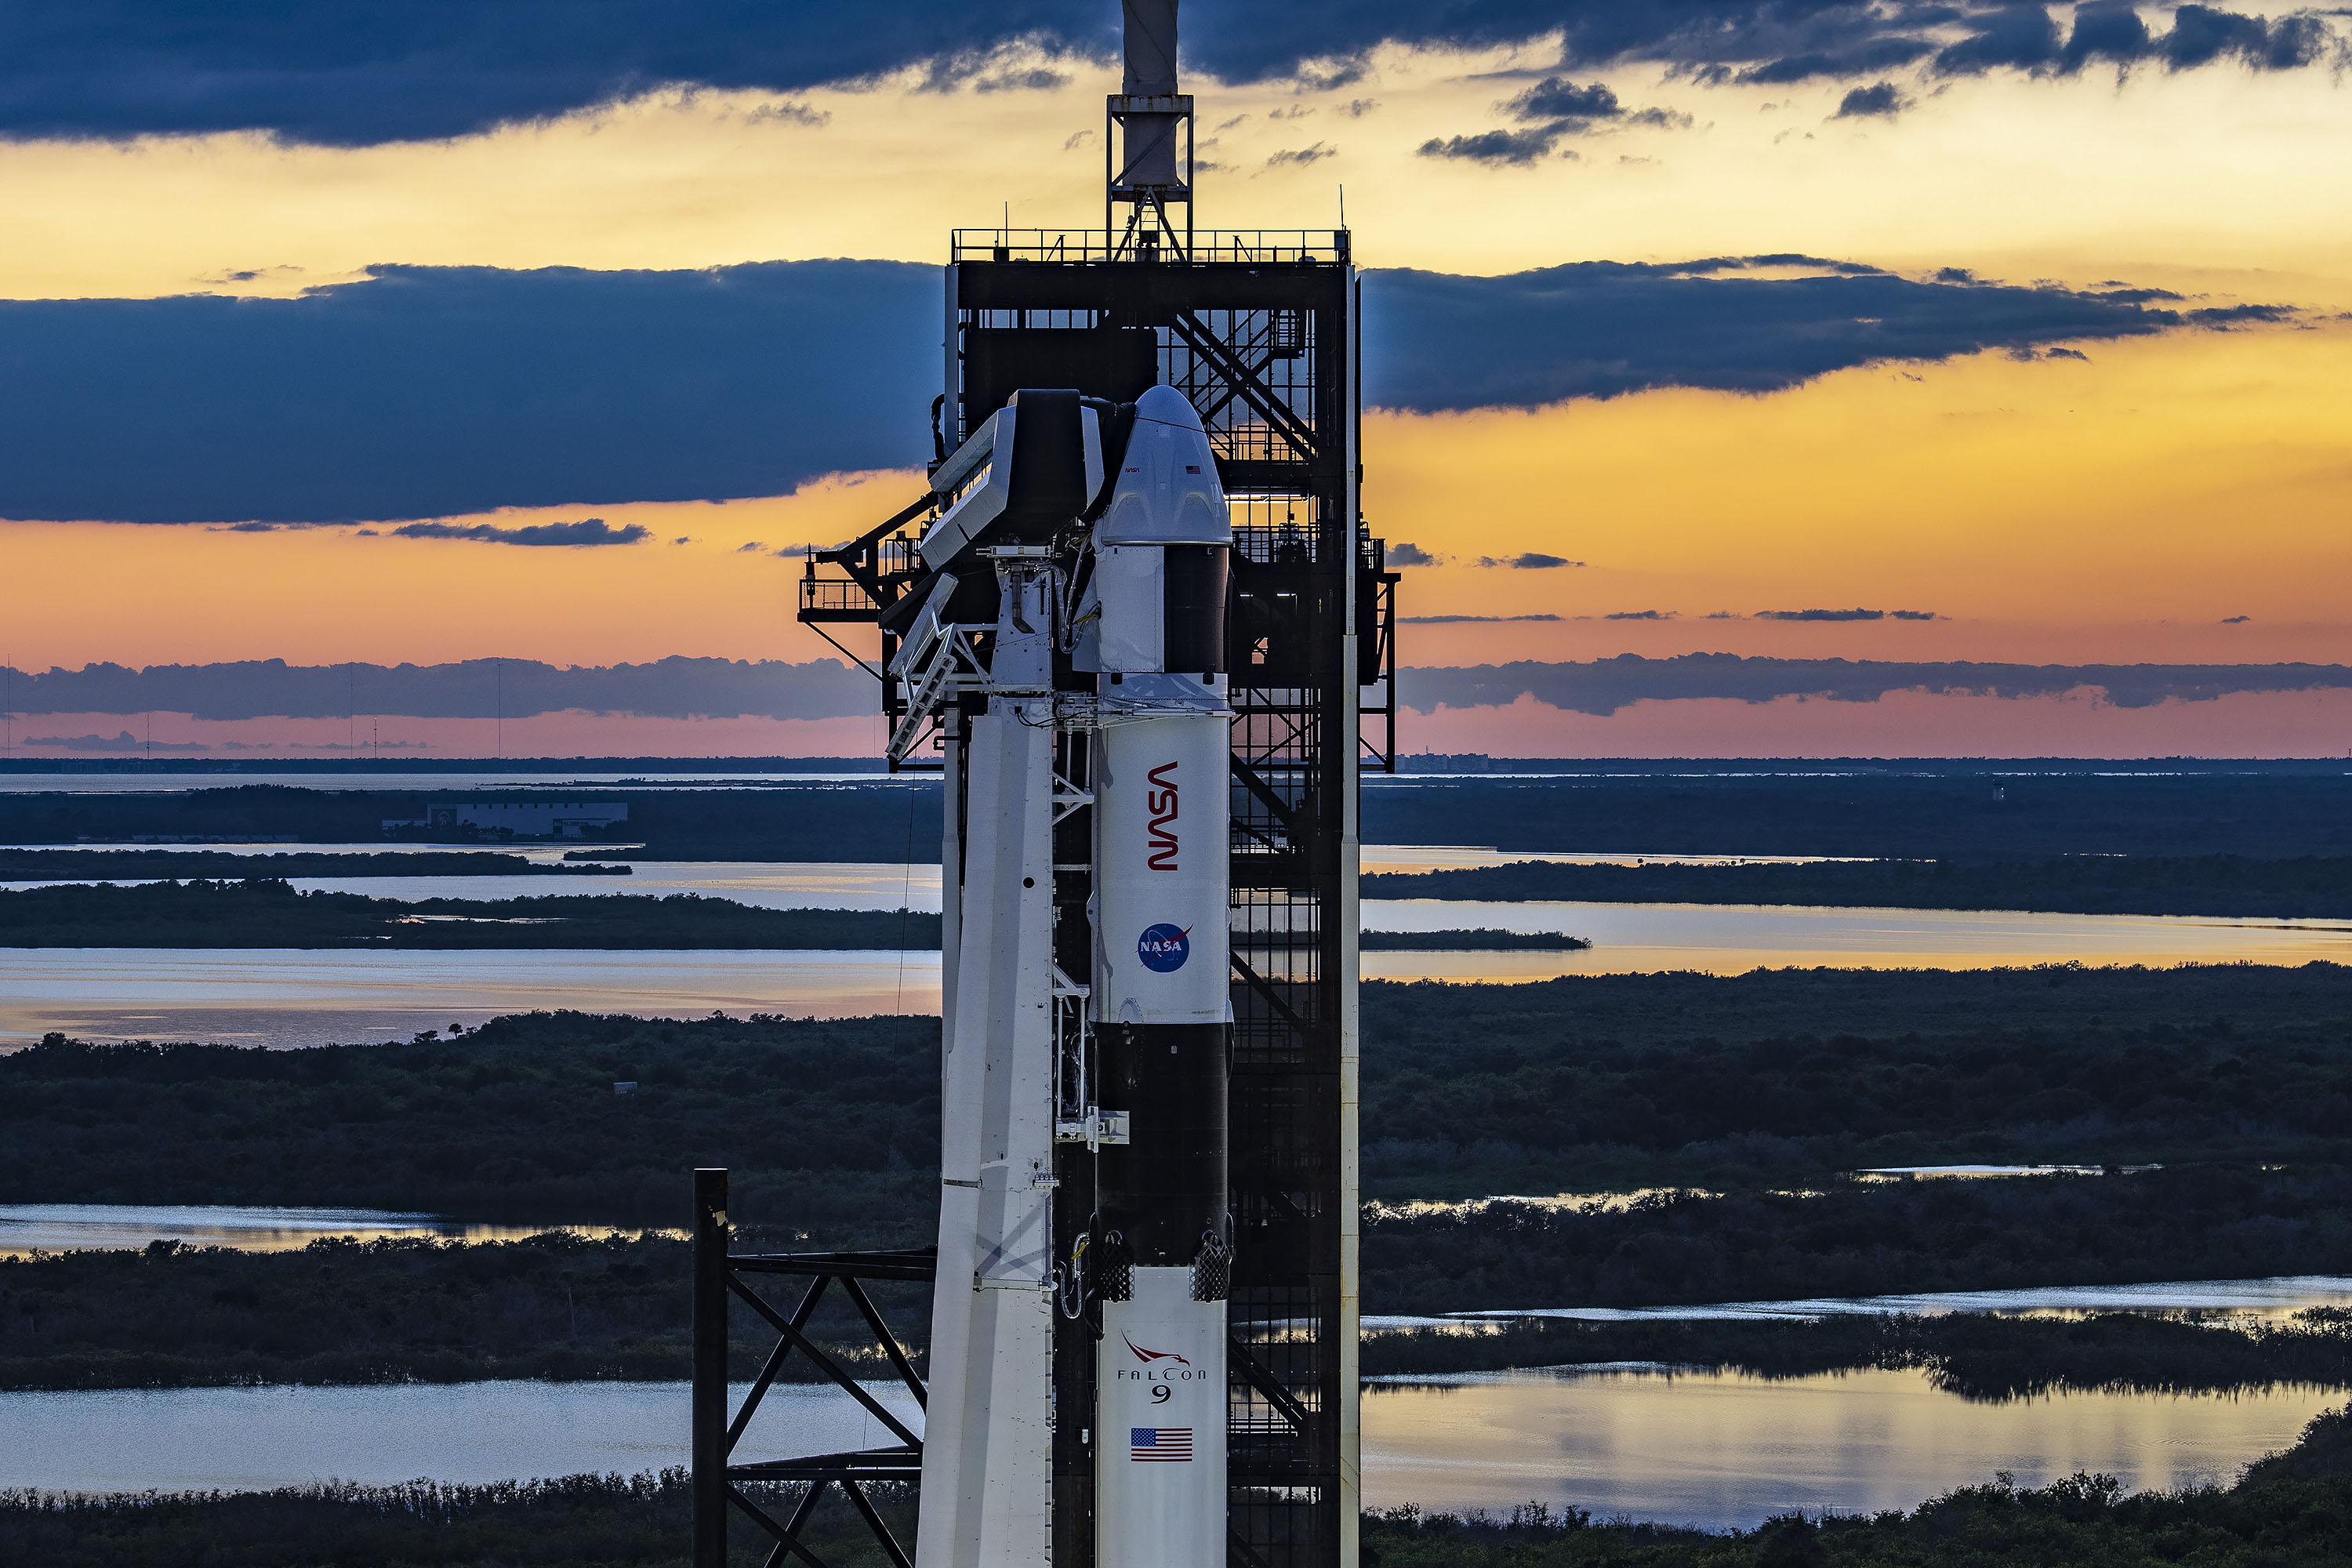 The SpaceX Falcon 9 rocket and Dragon capsule that will carry the Crew-5 mission to the International Space Station rest on launch pad 39A at NASA's Kennedy Space Center in Florida.  1, 2022.